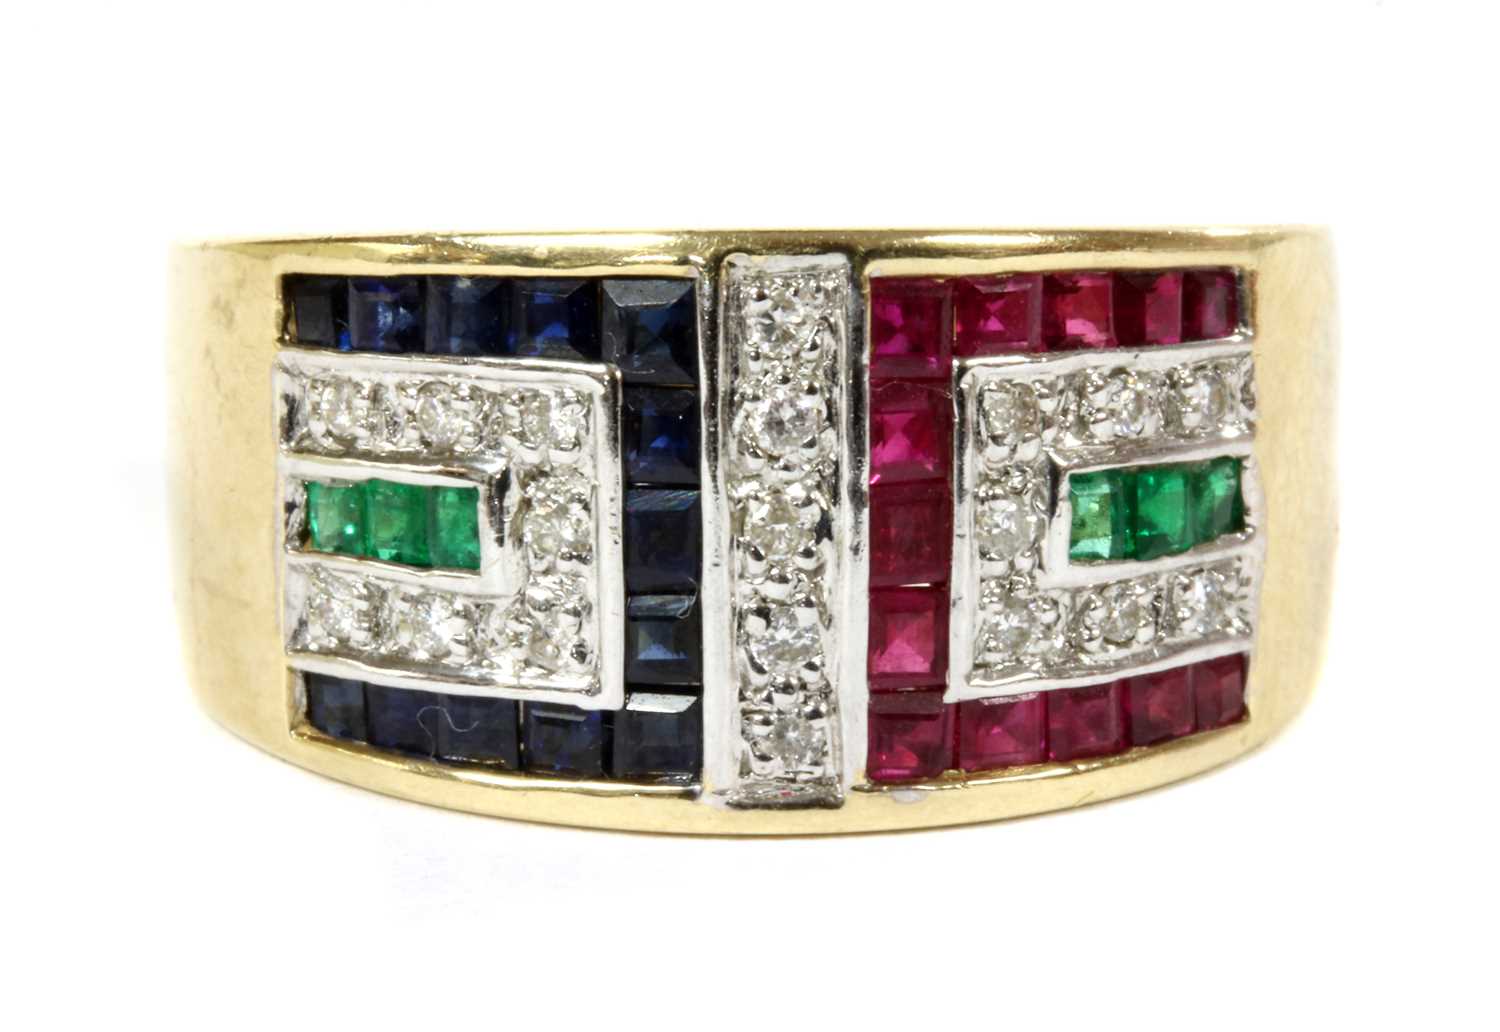 Lot 136 - A 9ct gold ruby, sapphire, emerald and diamond ring